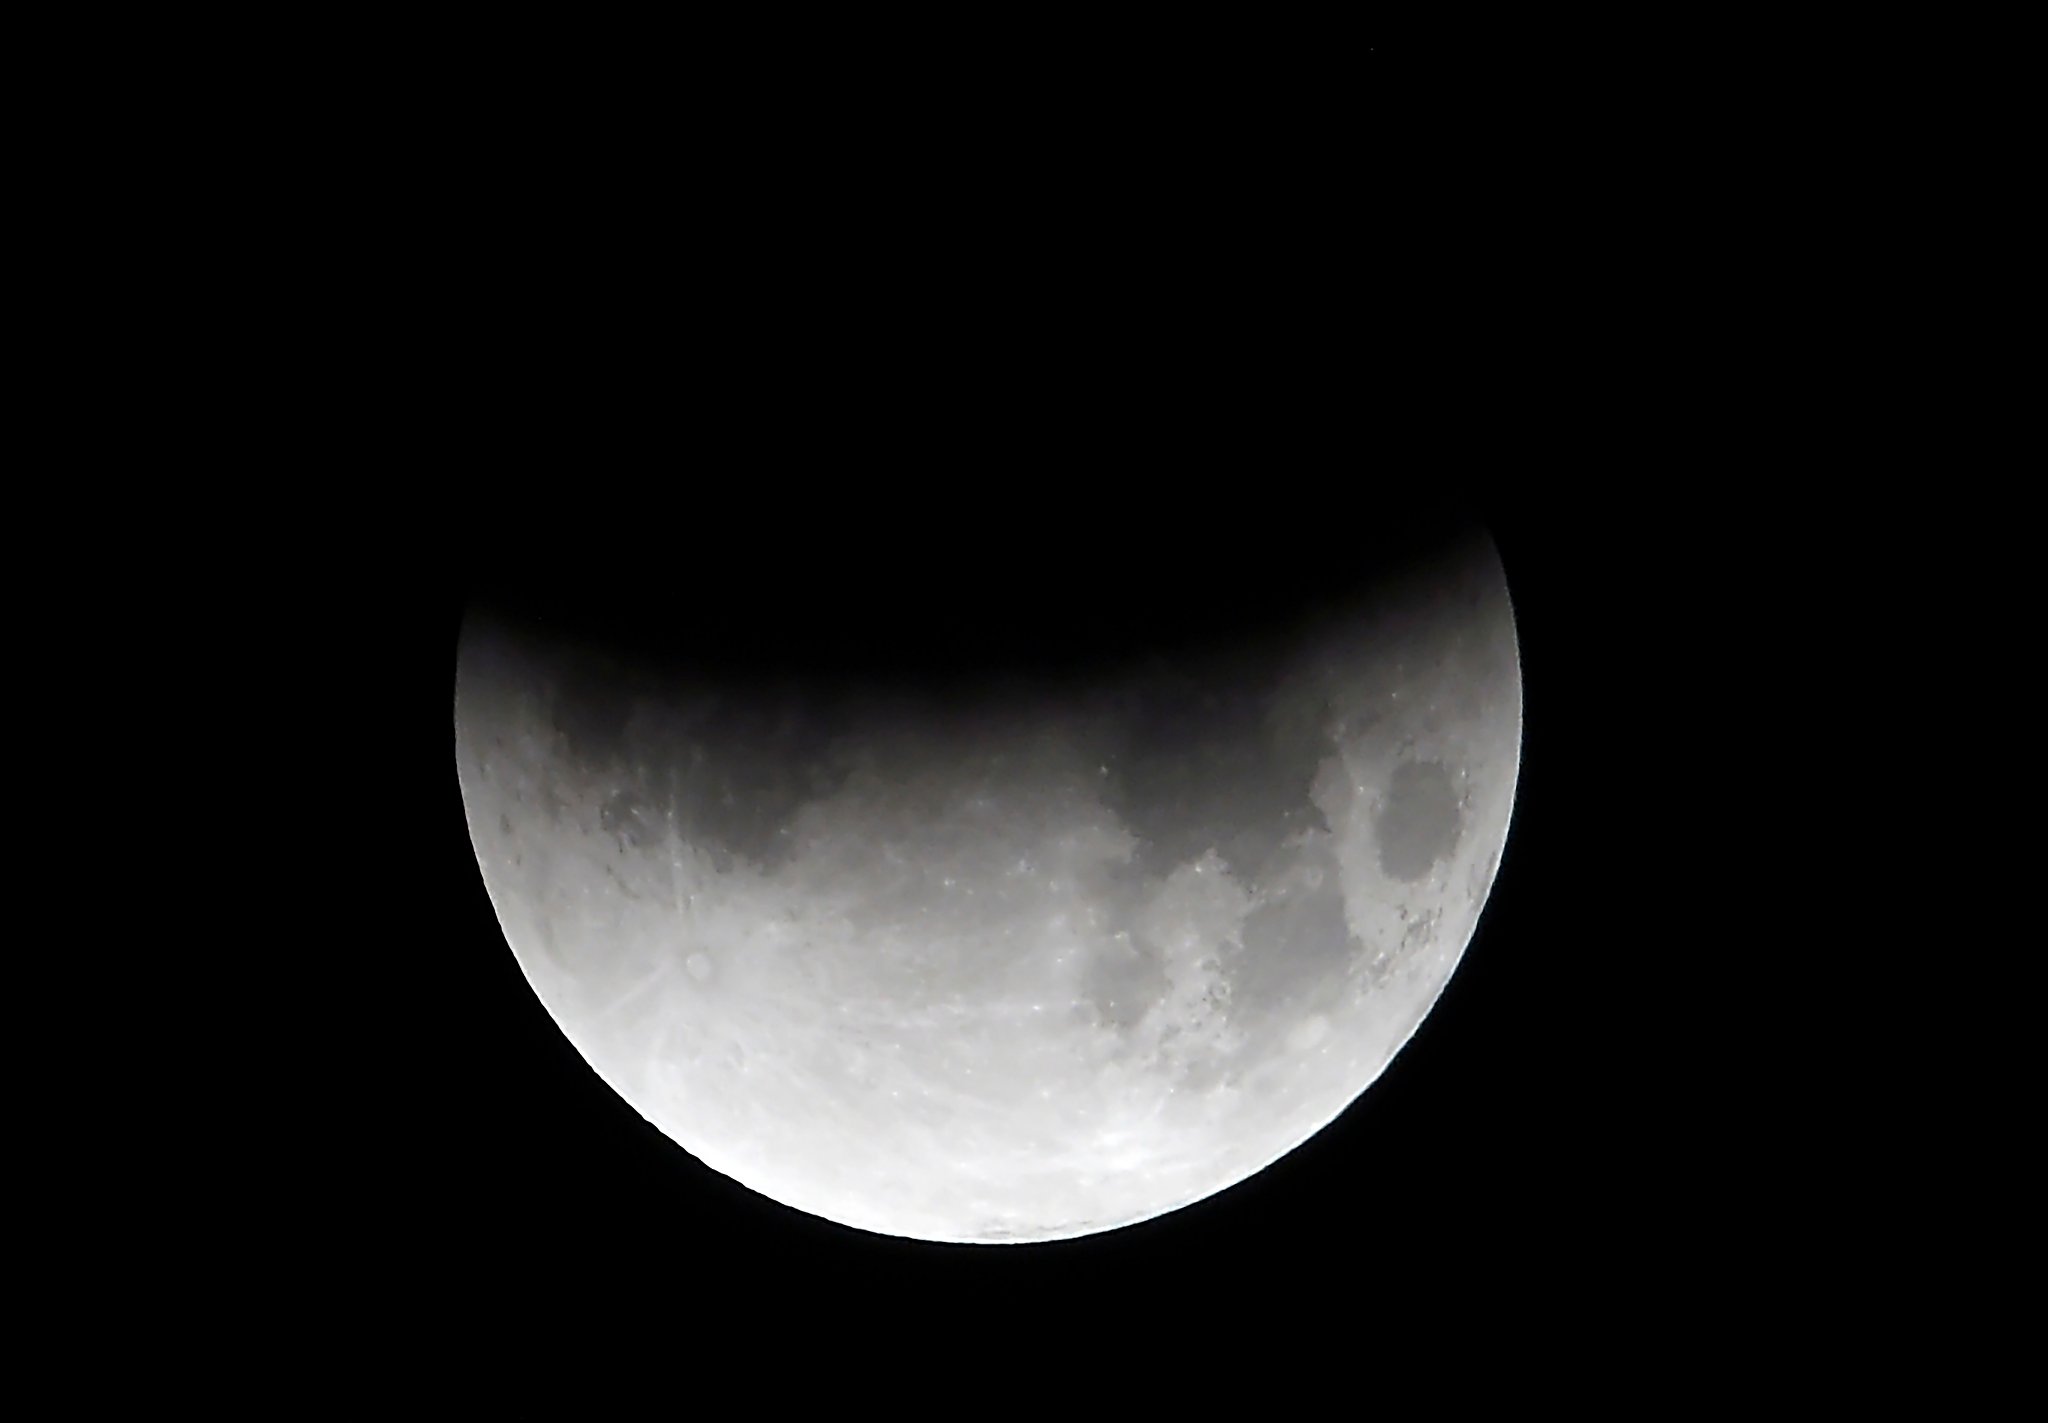 Near-total lunar eclipse to occur this week longest of the century – SFGate